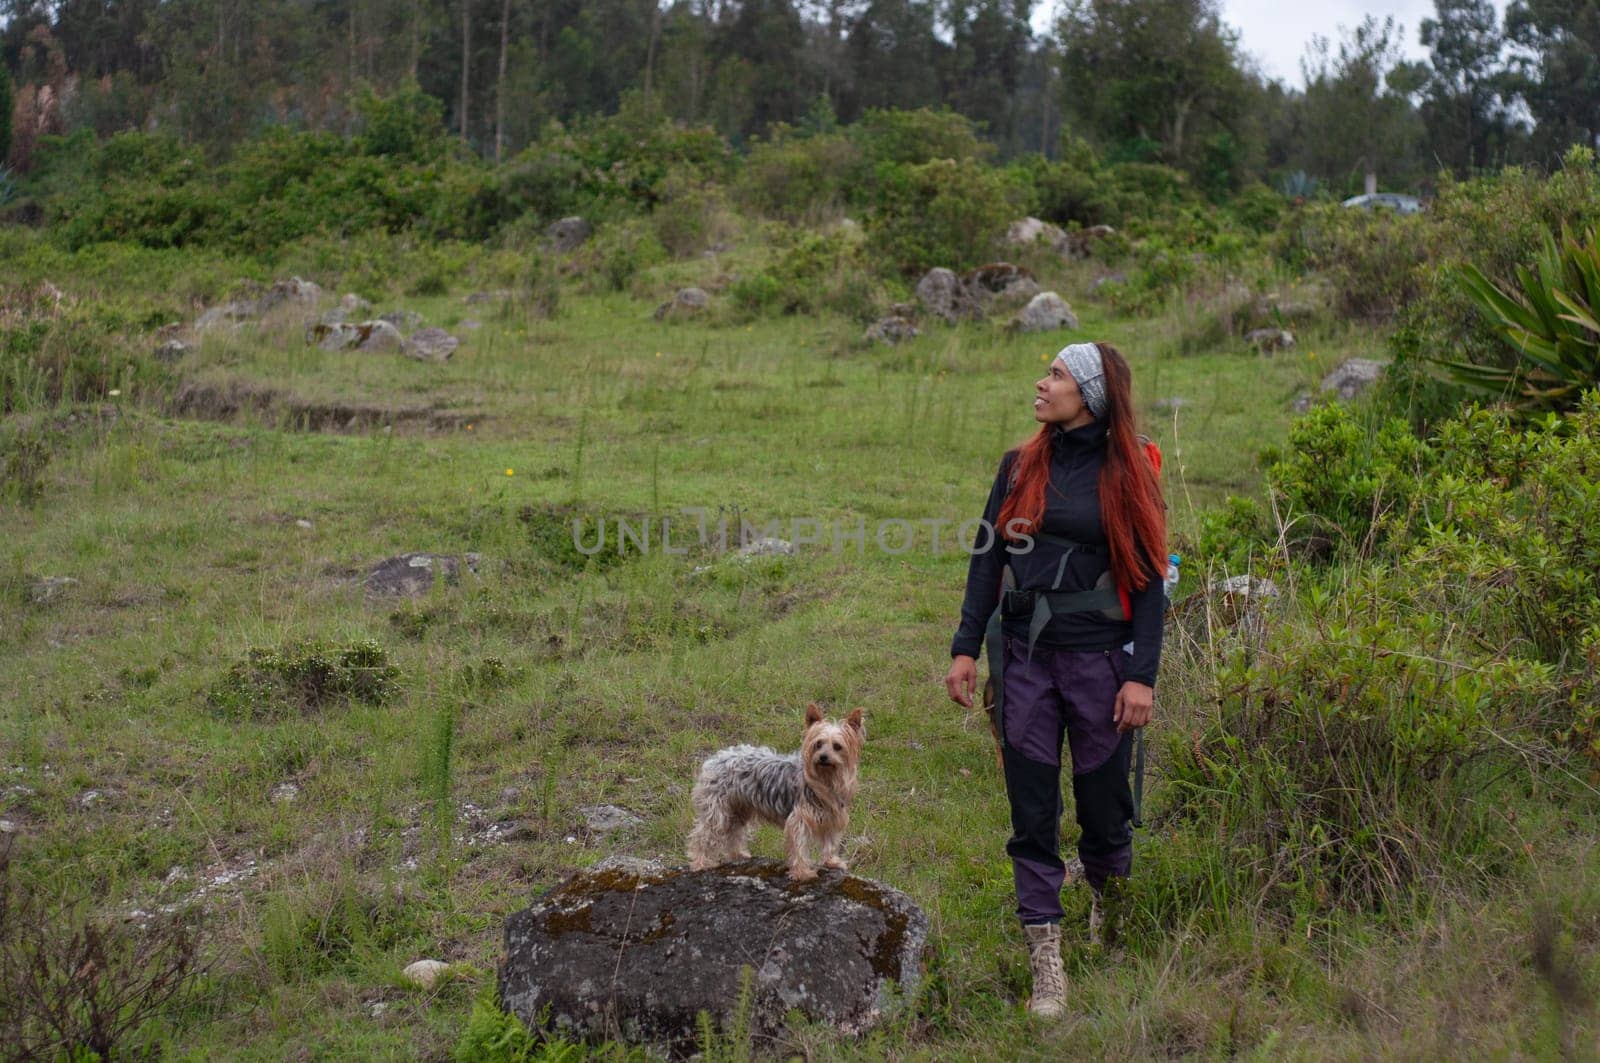 woman explorer admiring the grandeur of the landscape while her dog is on a large rock. High quality photo